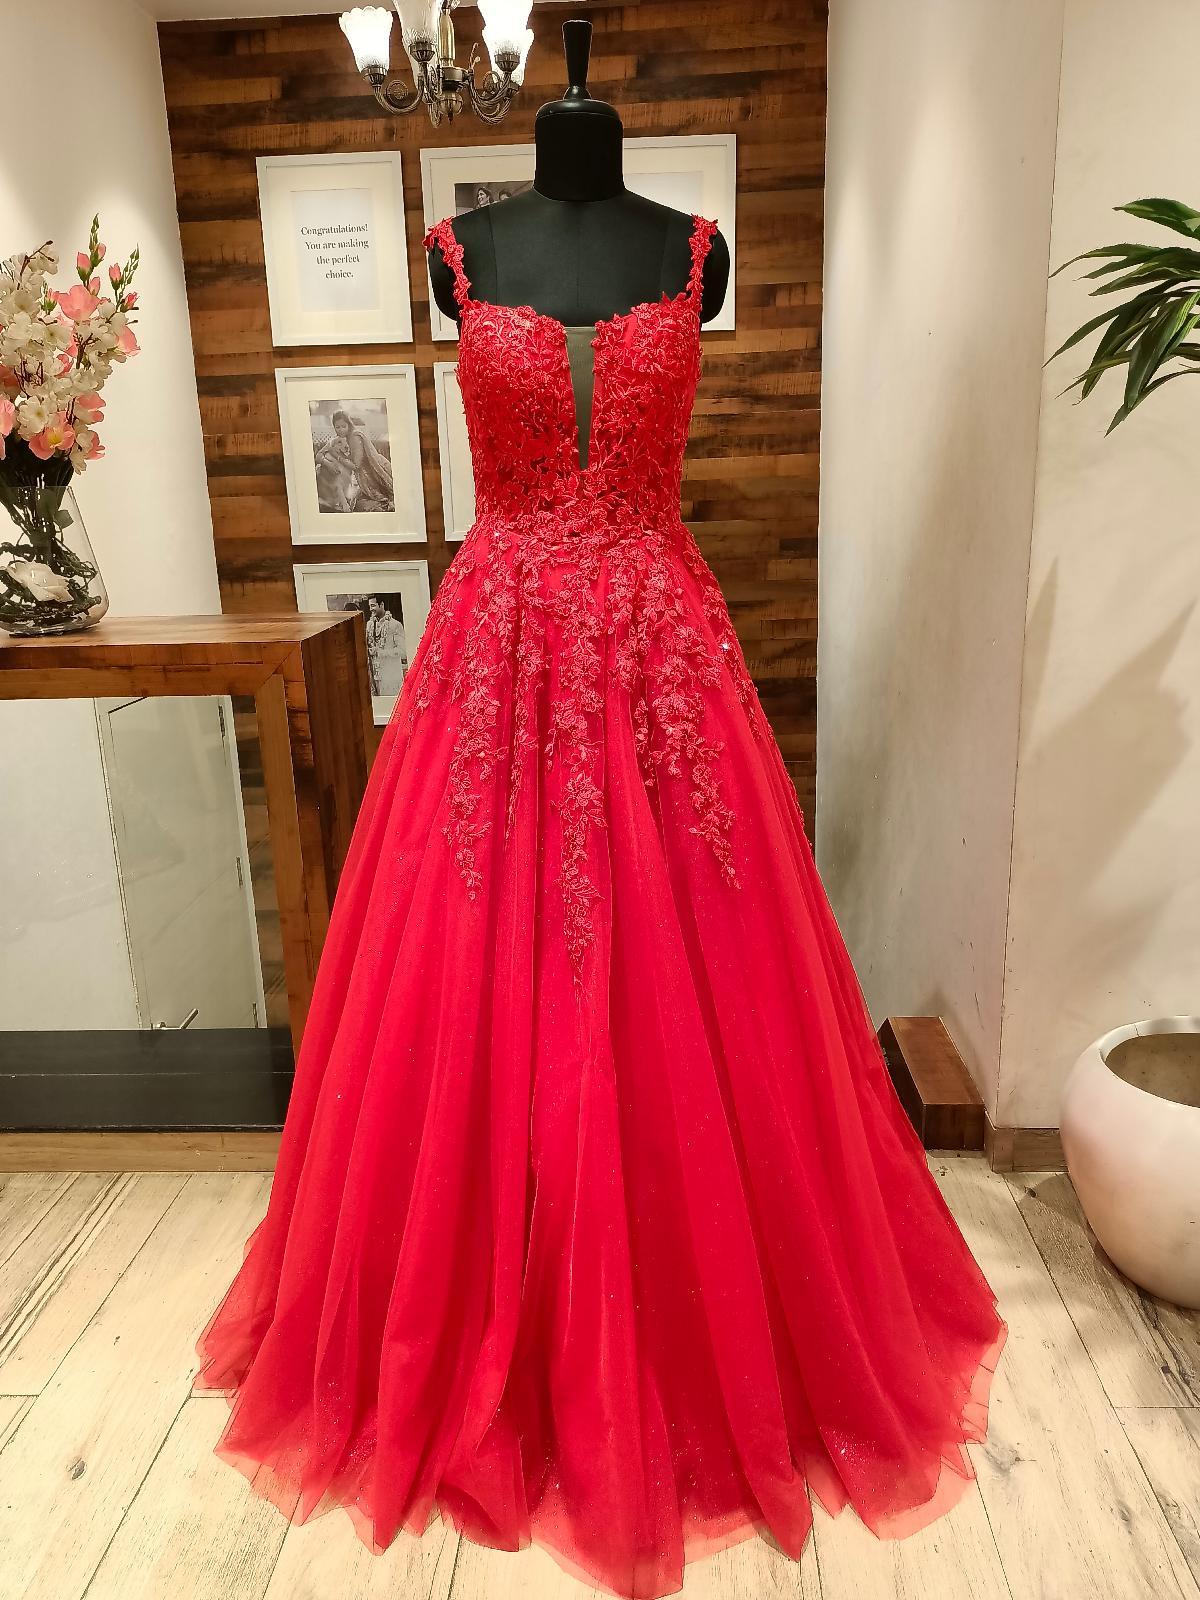 Red gown Stock Photos, Royalty Free Red gown Images | Depositphotos